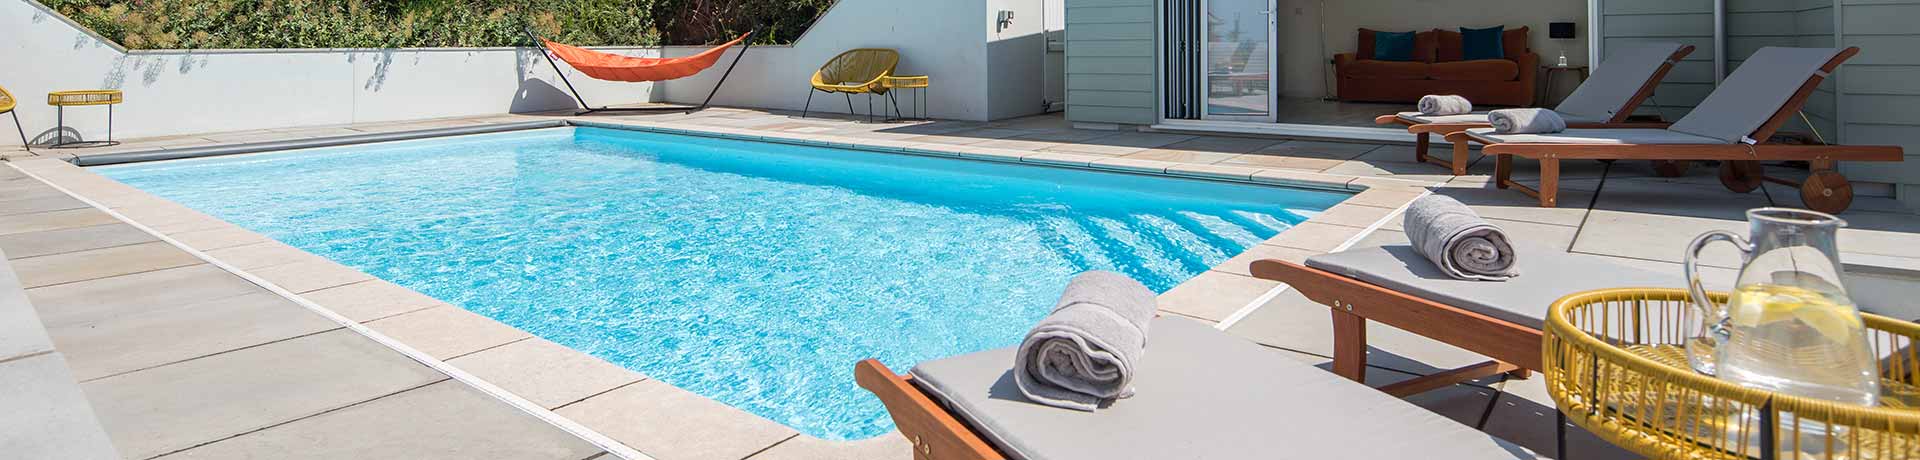 Holiday Cottages with Outdoor Pools